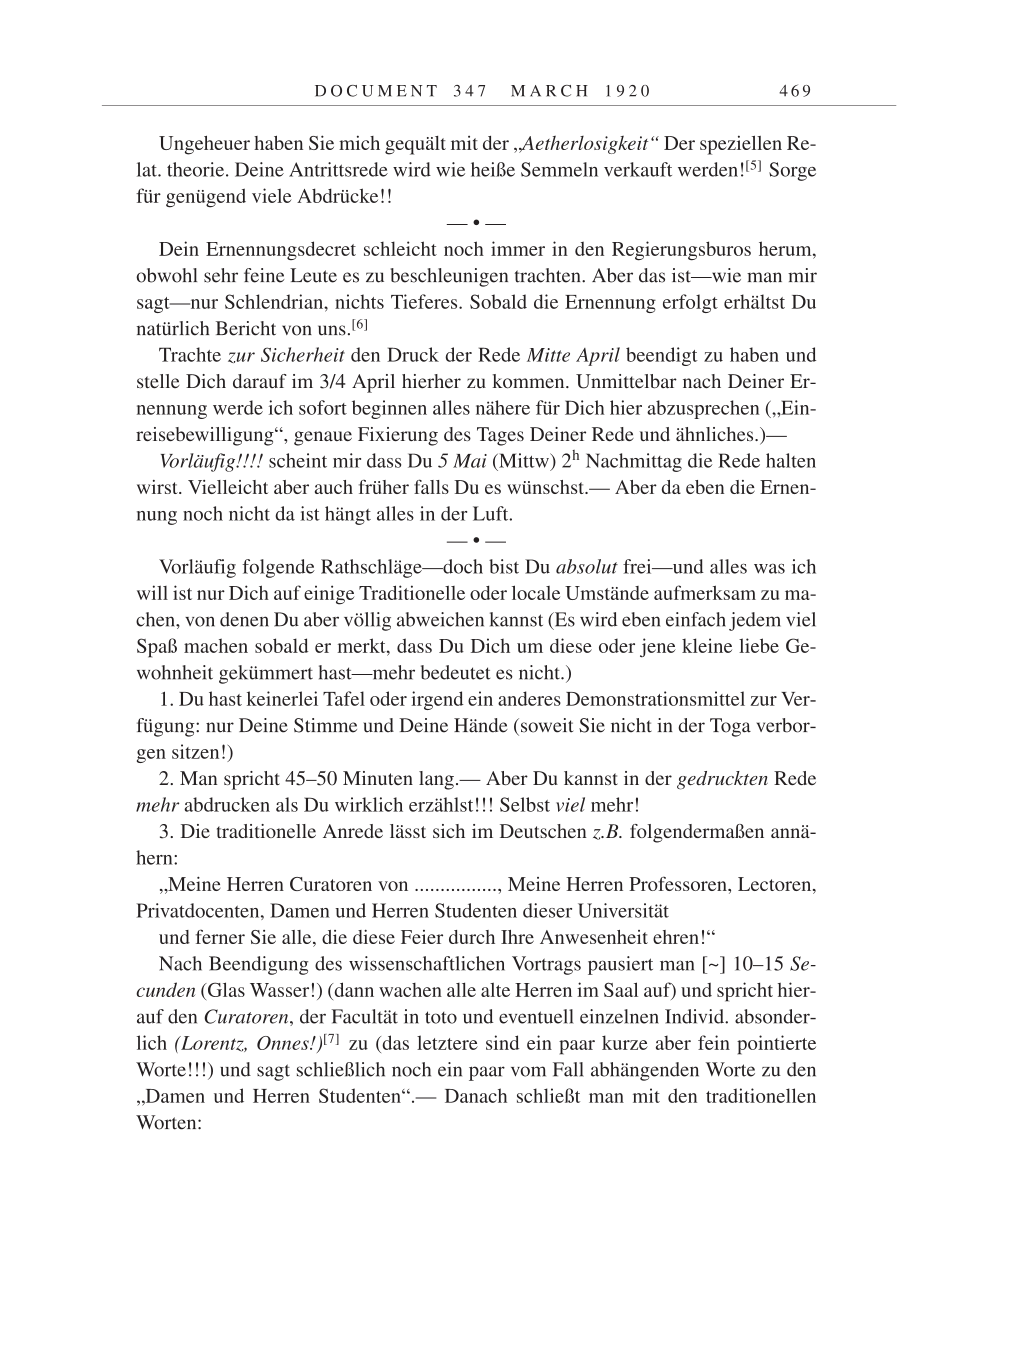 Volume 9: The Berlin Years: Correspondence January 1919-April 1920 page 469